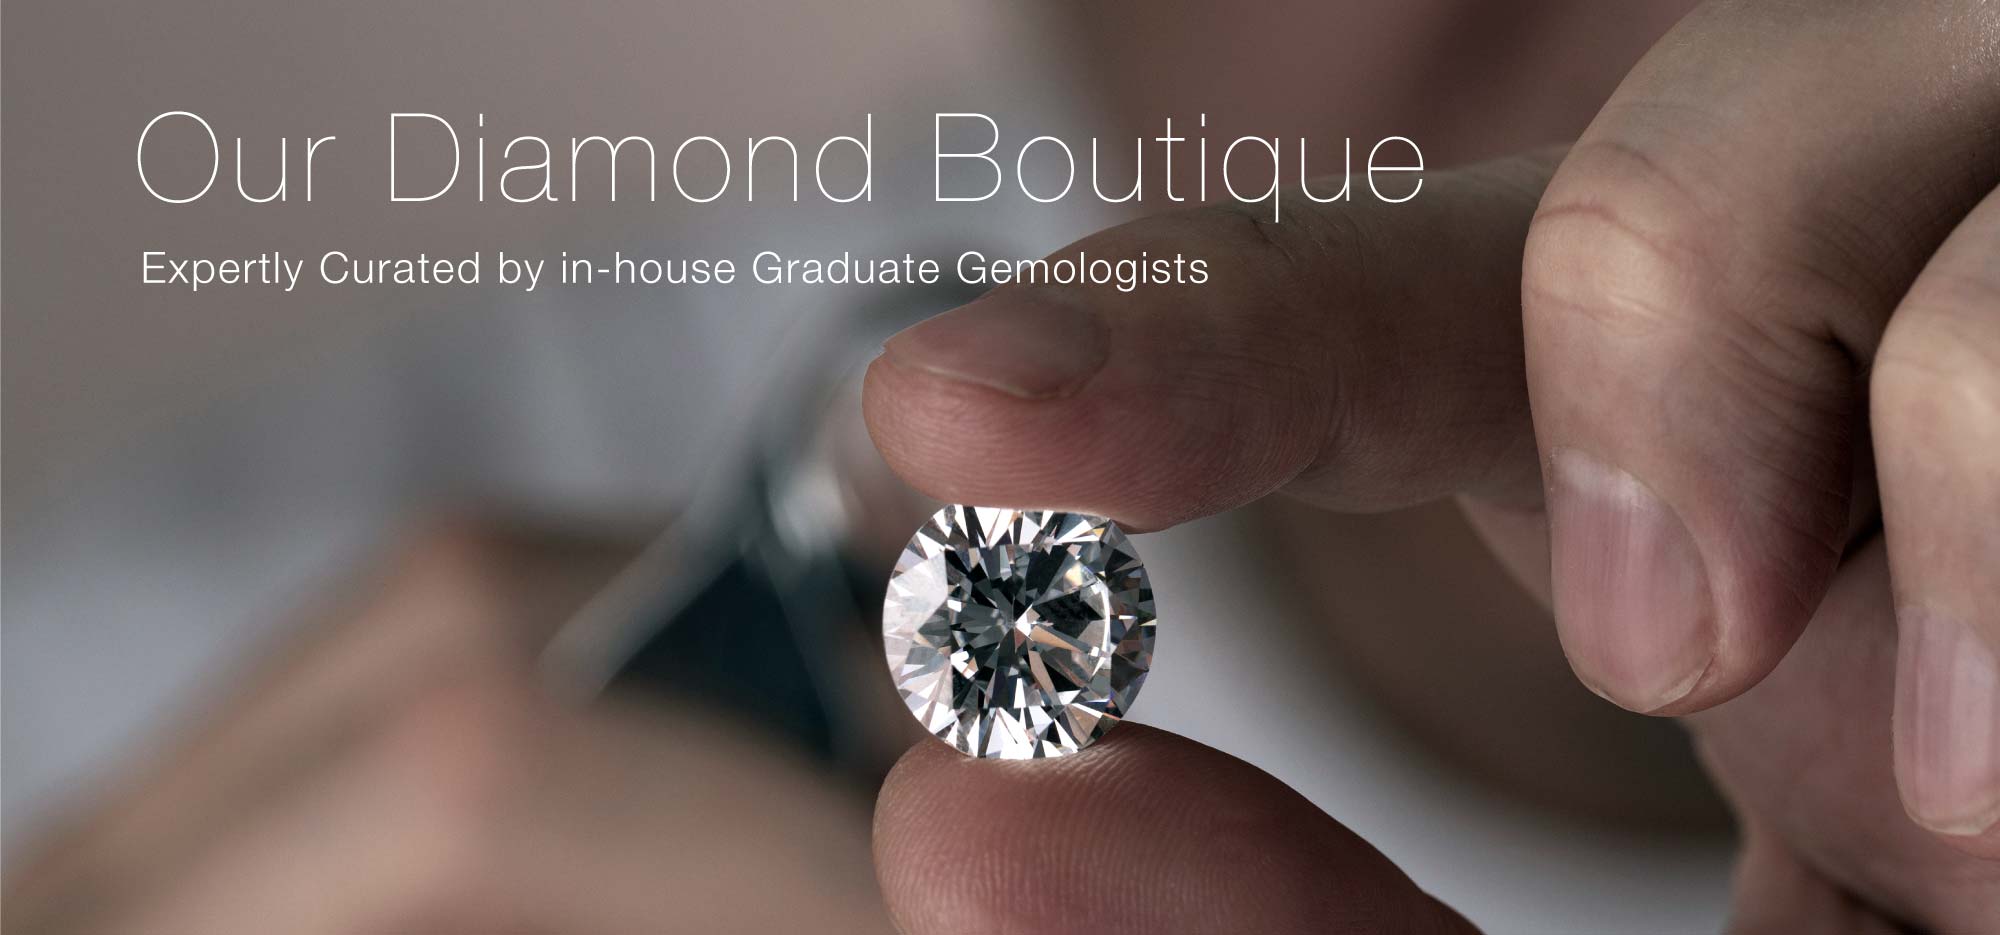 Our Diamond Boutique: Expertly Curated by in-house Graduate Gemologists